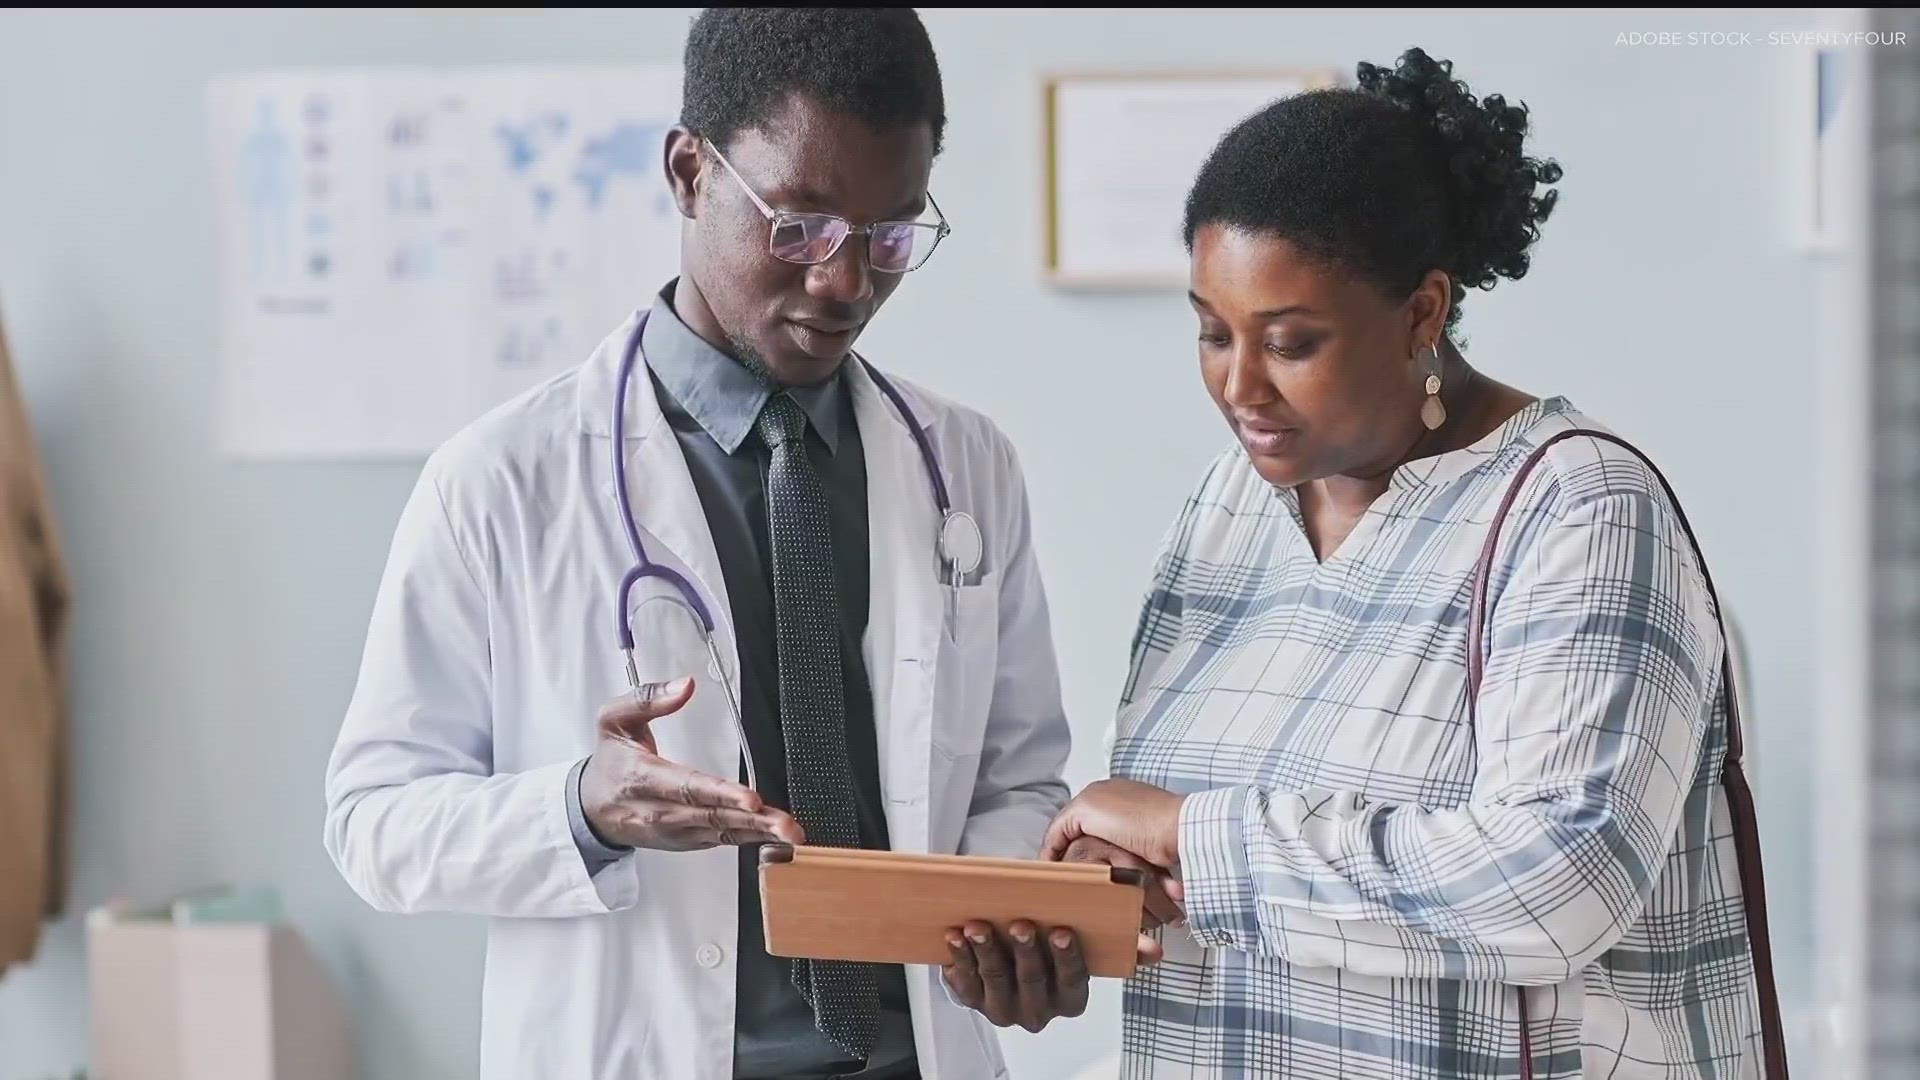 Black women start to talk about uterine fibroids, a condition many get but  few speak about